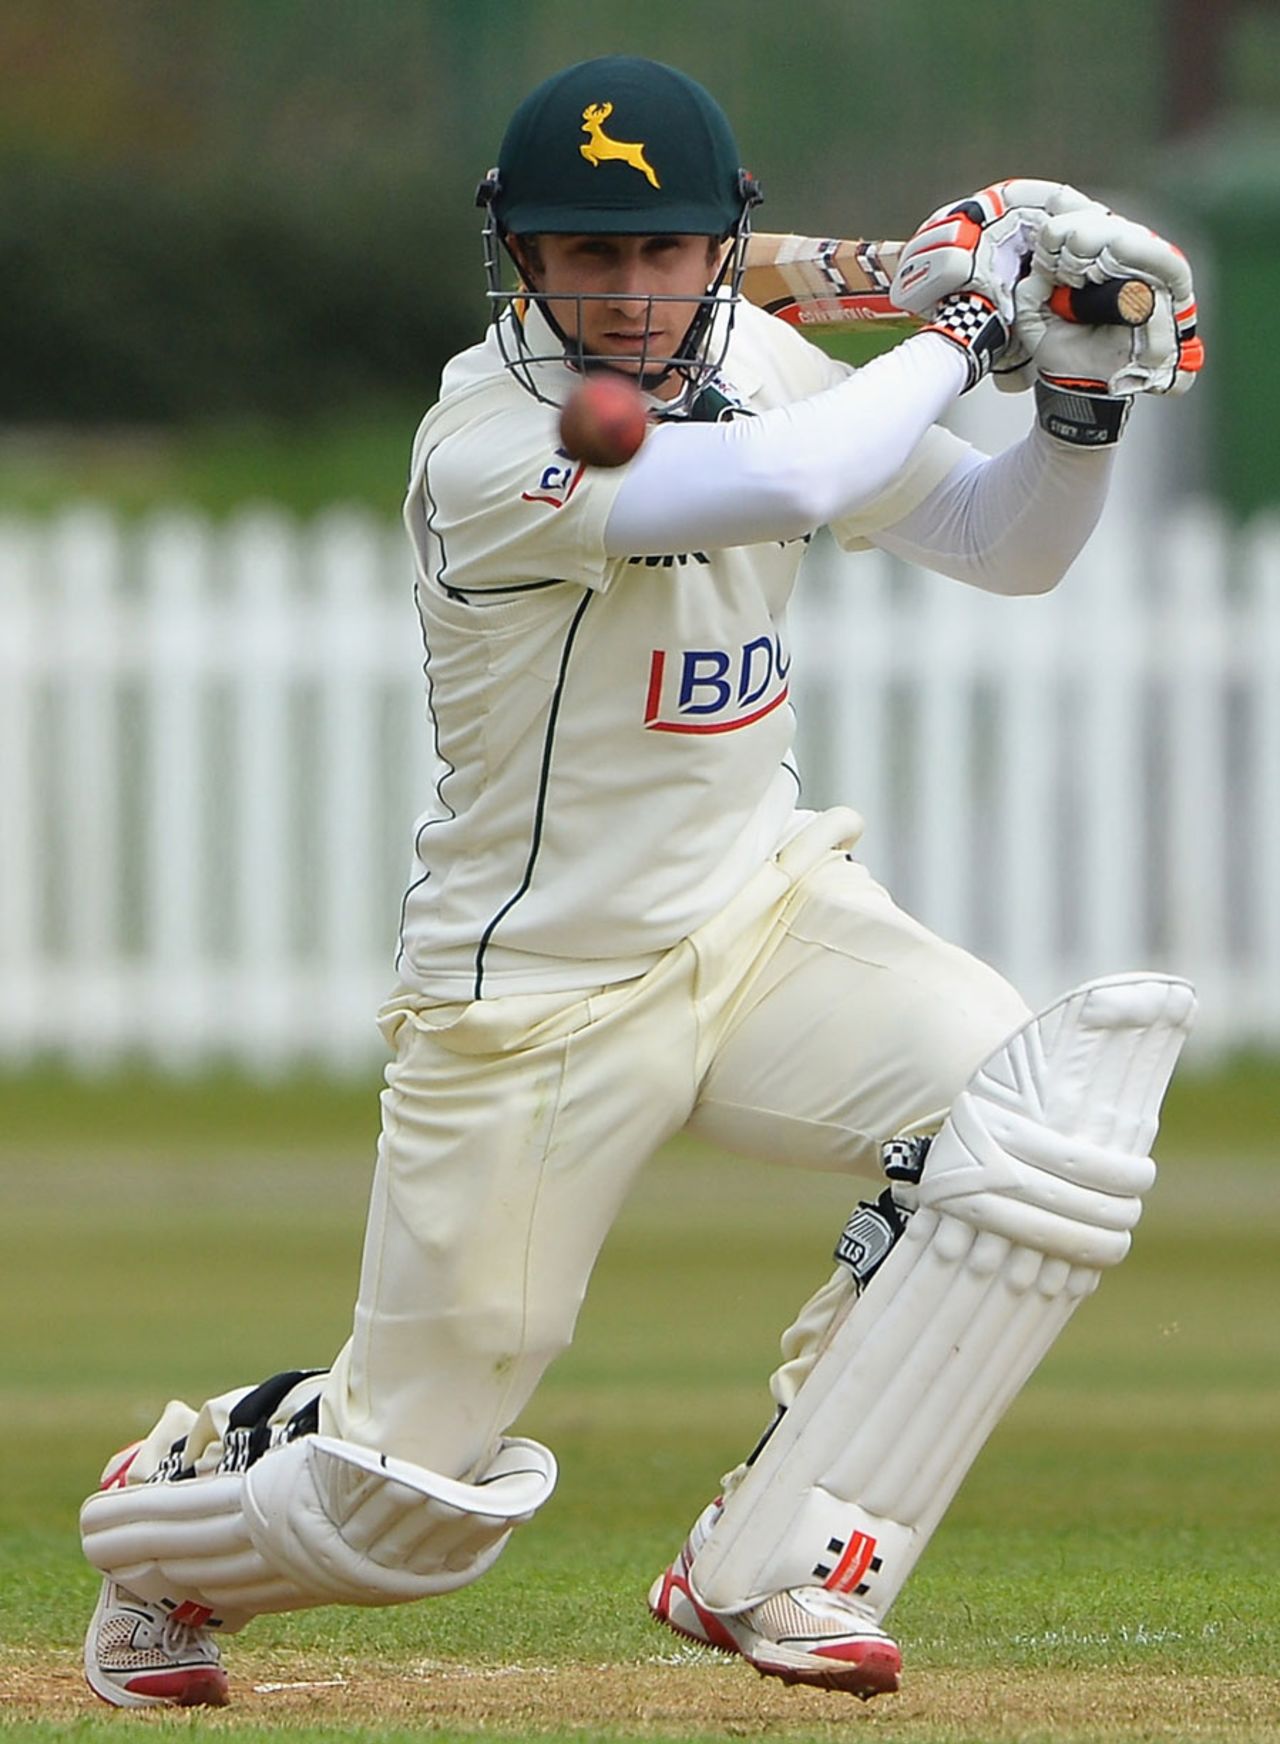 James Taylor watches the ball off the bat, Derbyshire v Nottinghamshire, County Championship, Division One, Derby, 2nd day, April 25, 2013